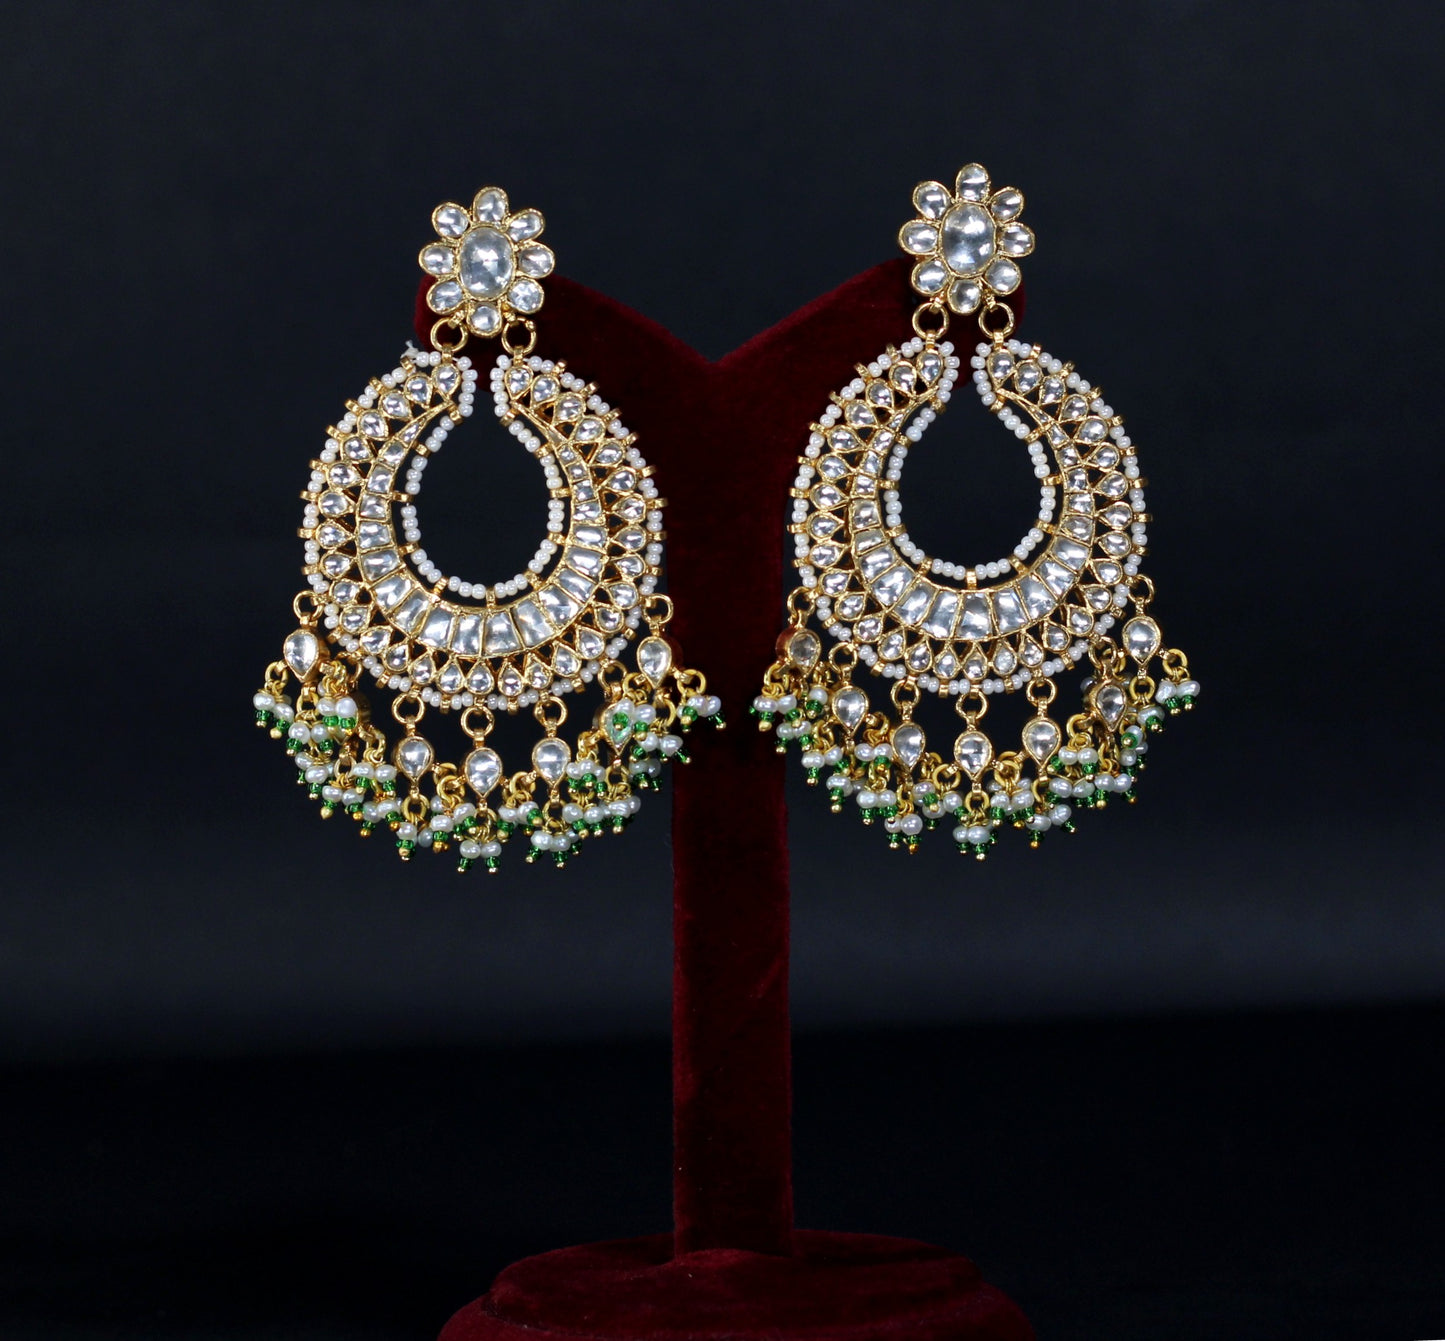 EARRINGS IN 92.5 STERLING SILVER IN 18KT GOLD PLATED WITH KUNDAN, GREEEN ONYX AND FRESH WATER PEARLS